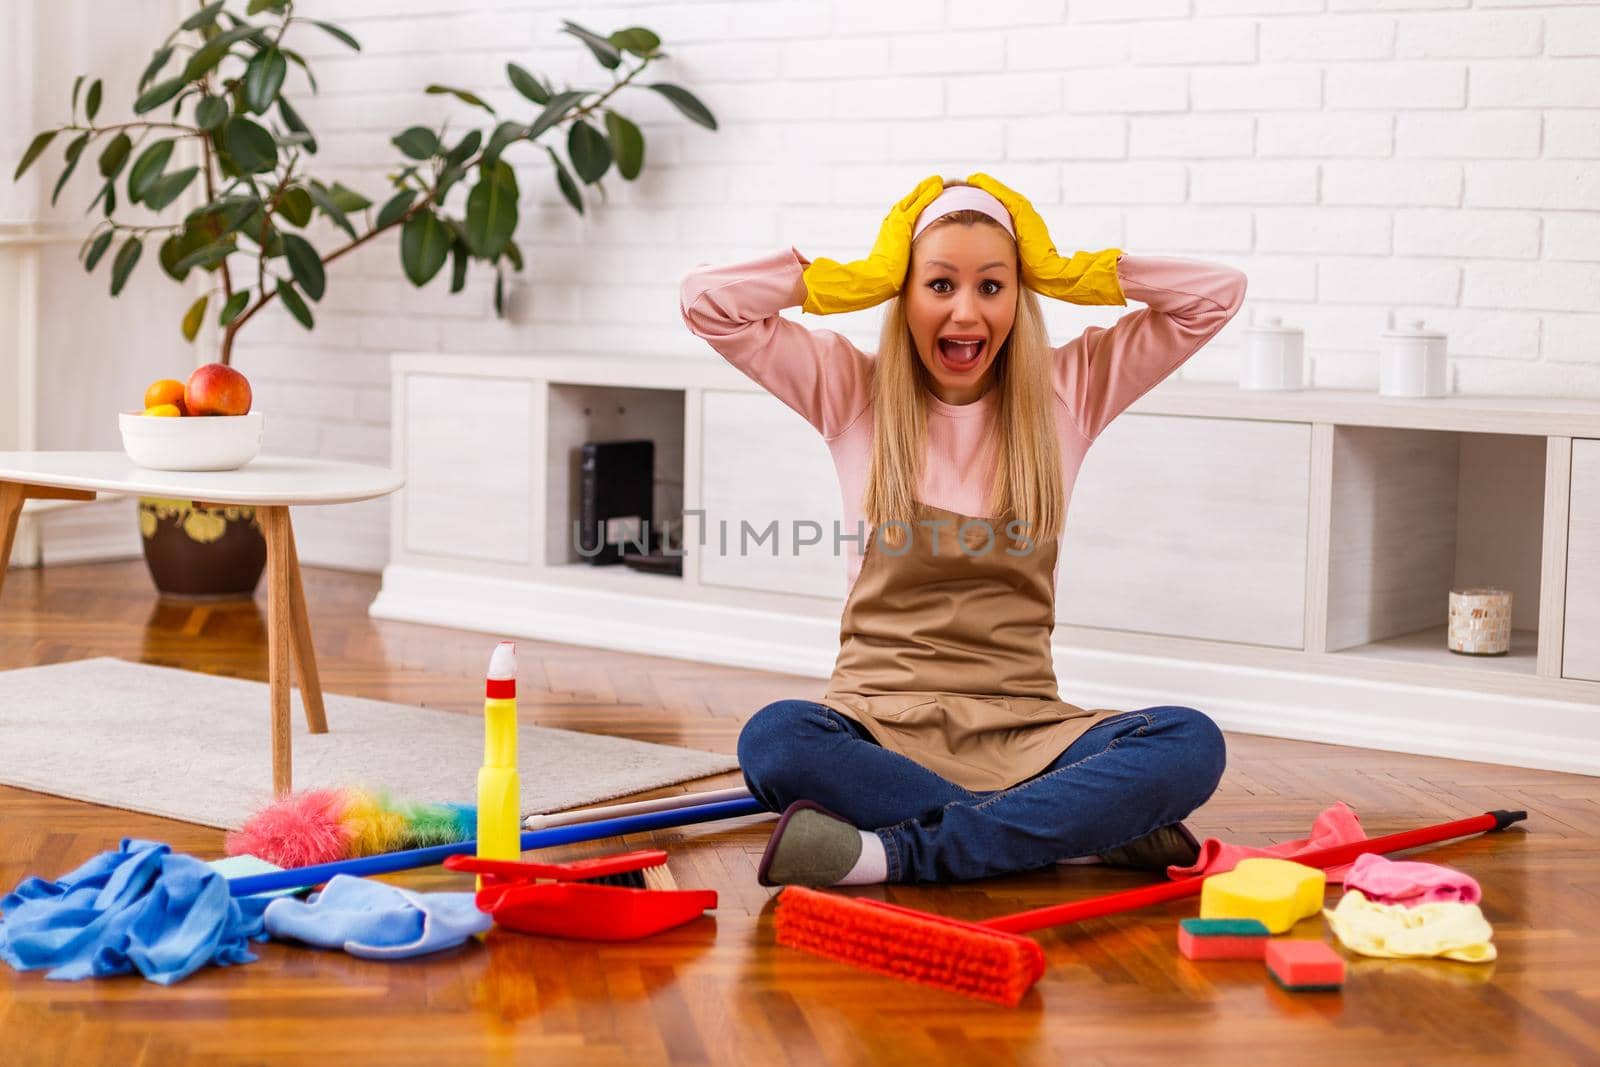 Image of  overworked housewife with cleaning equipment shouting while sitting in the living room.